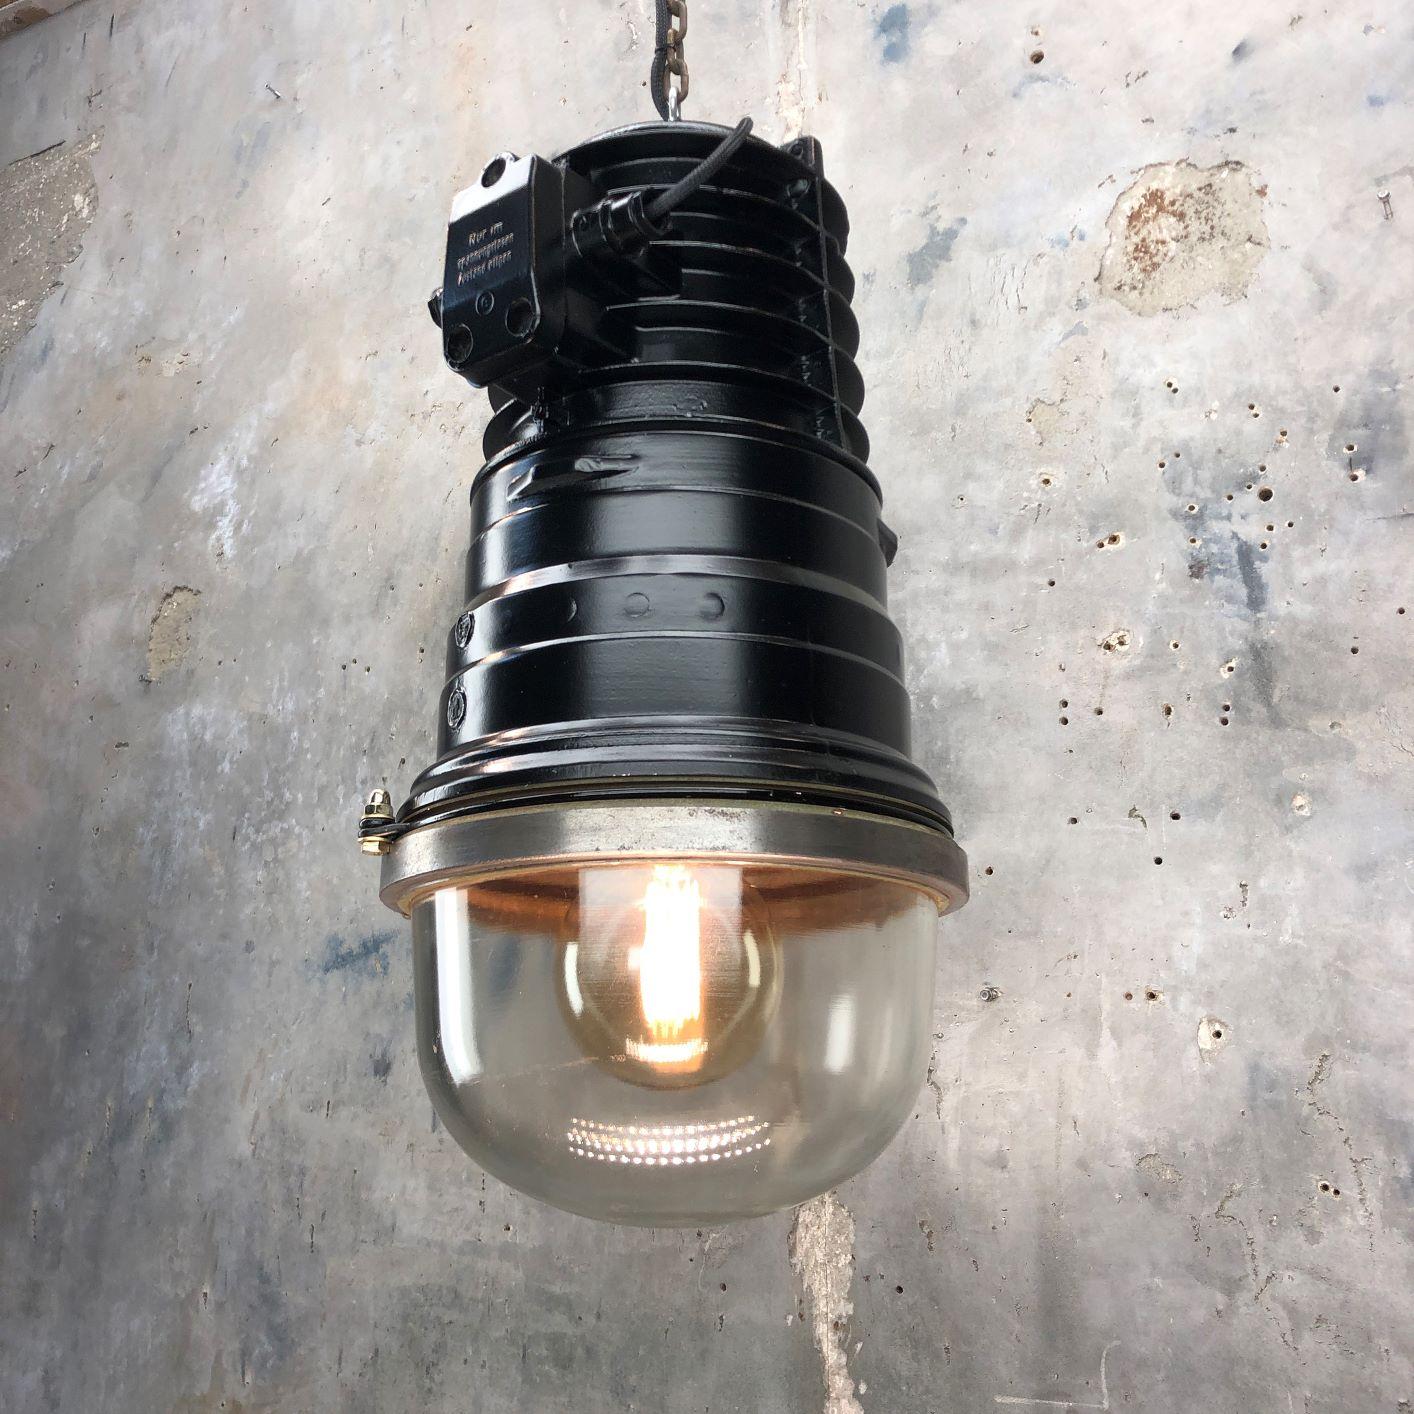 1970s Vintage Industrial Black Explosion Proof Ceiling Pendant by EOW For Sale 3